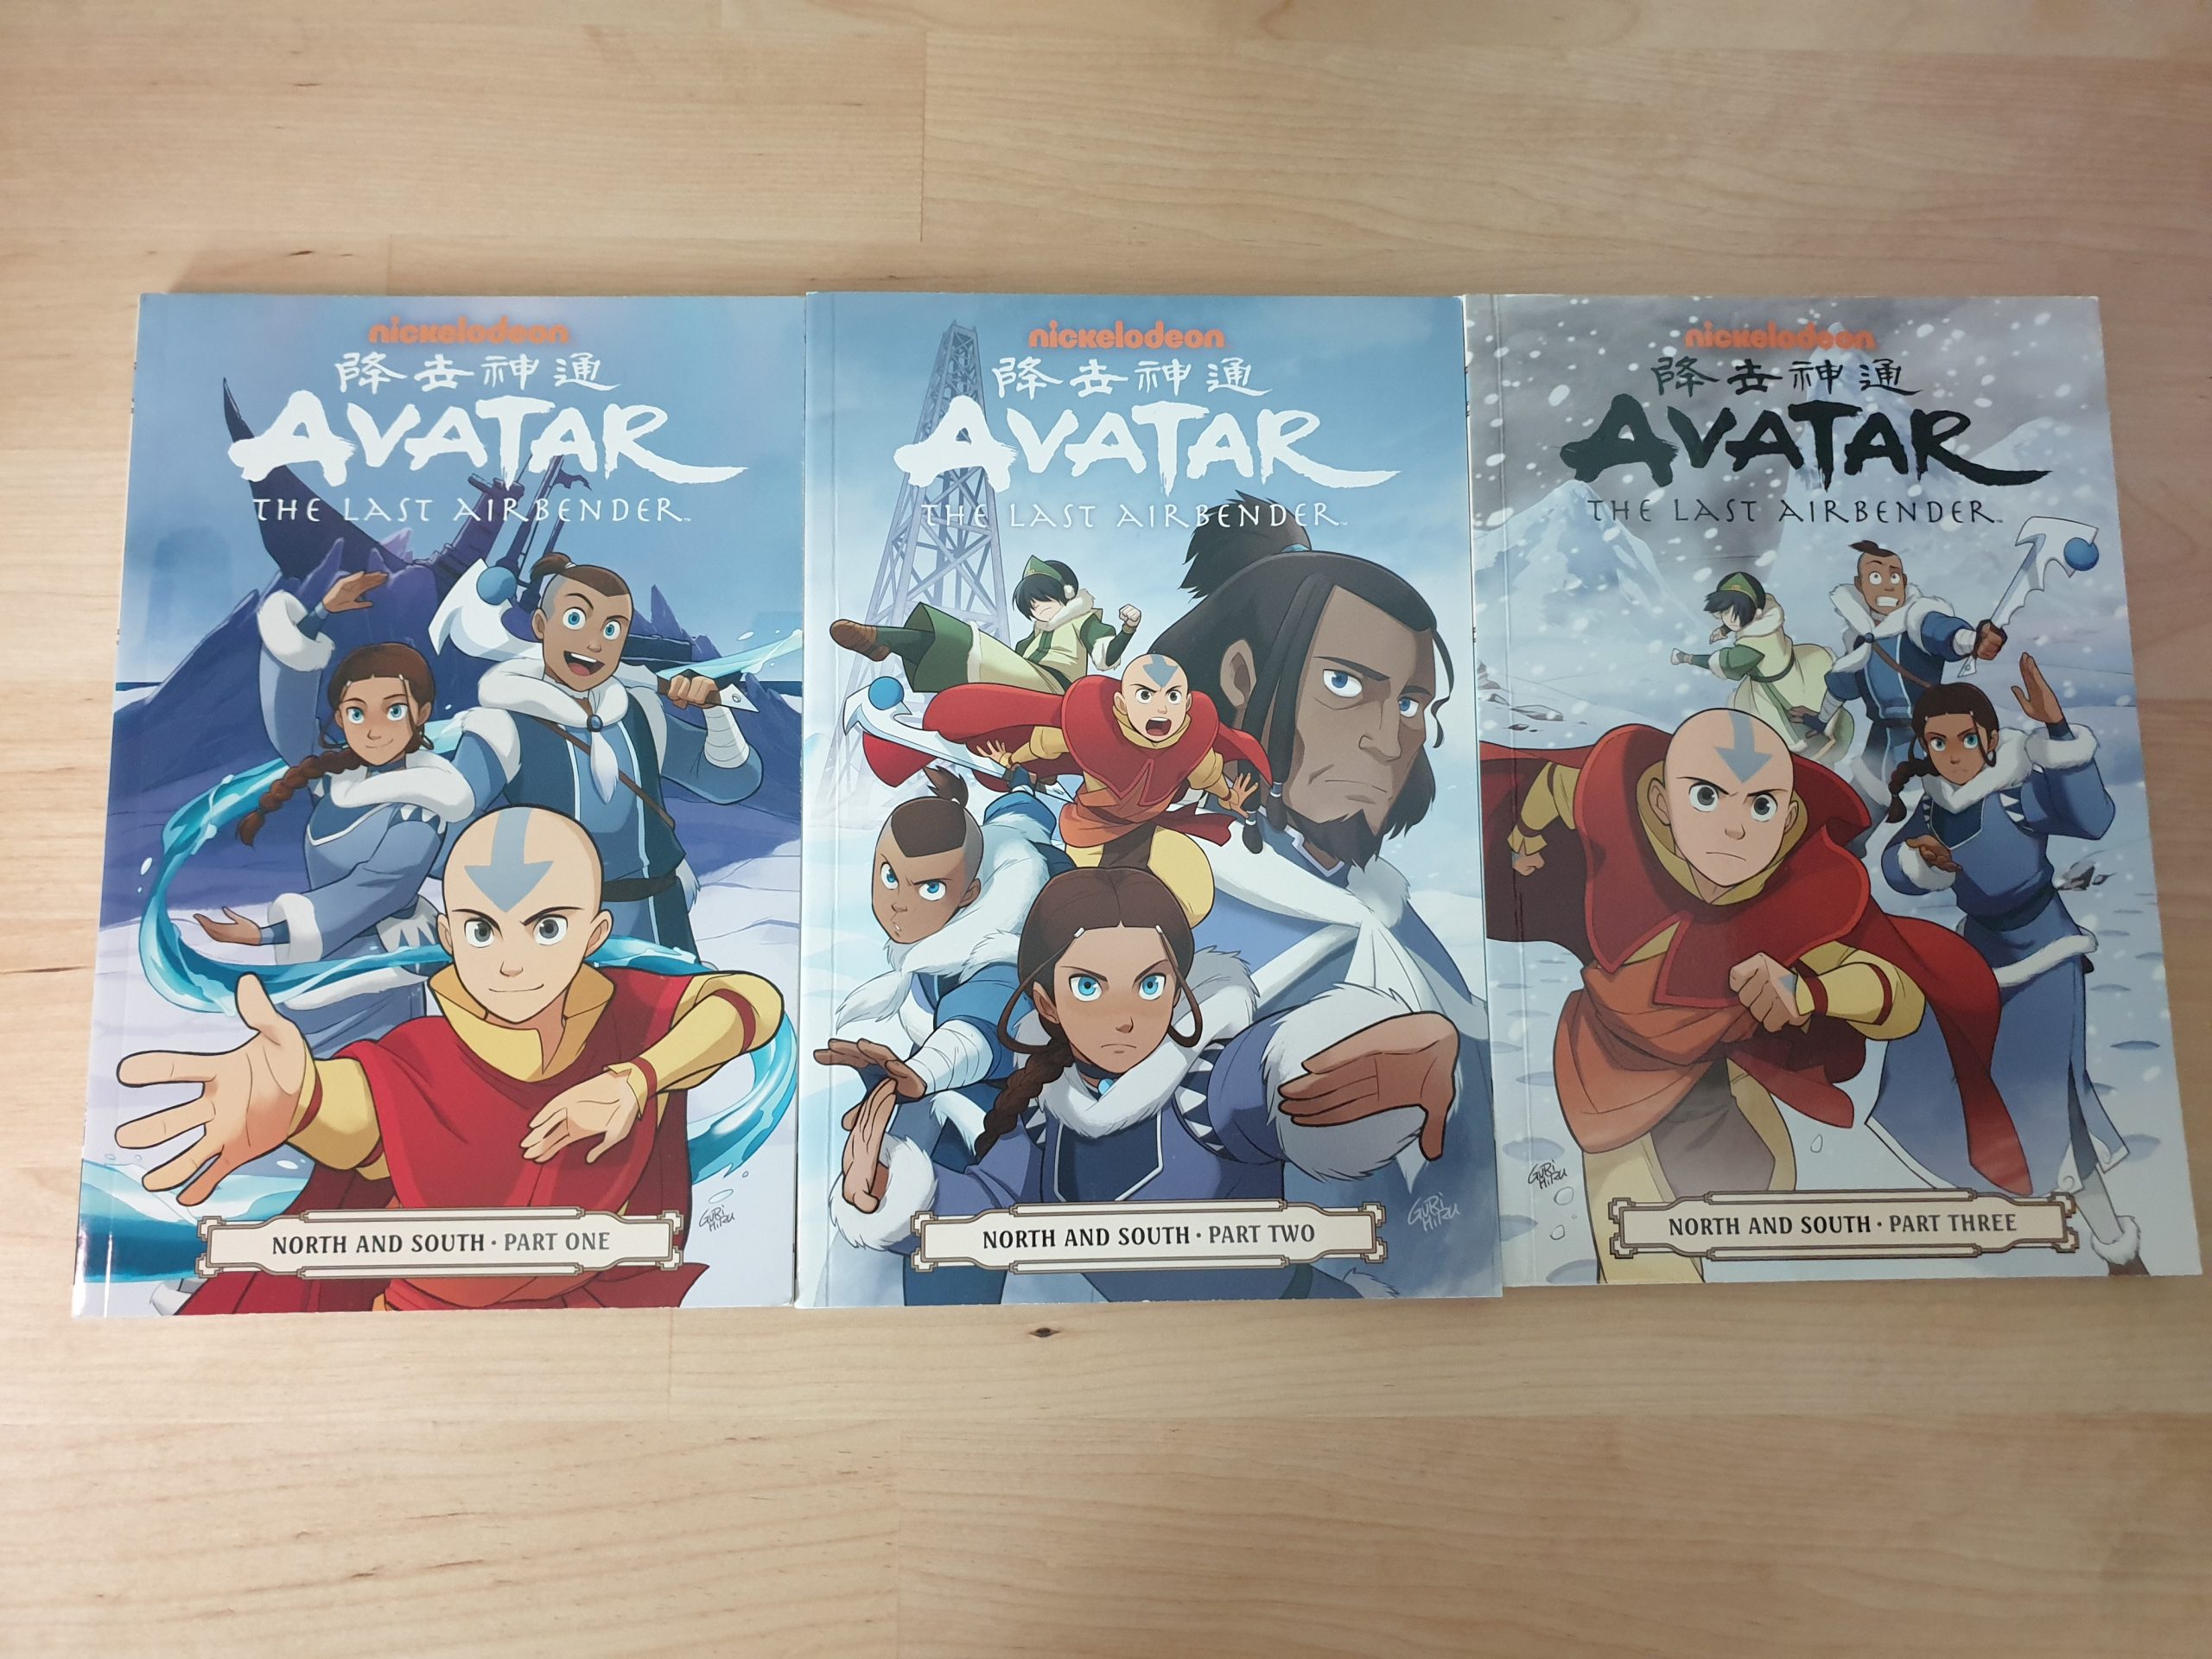 North and South Parts I, II and III (Avatar: The Last Airbender)